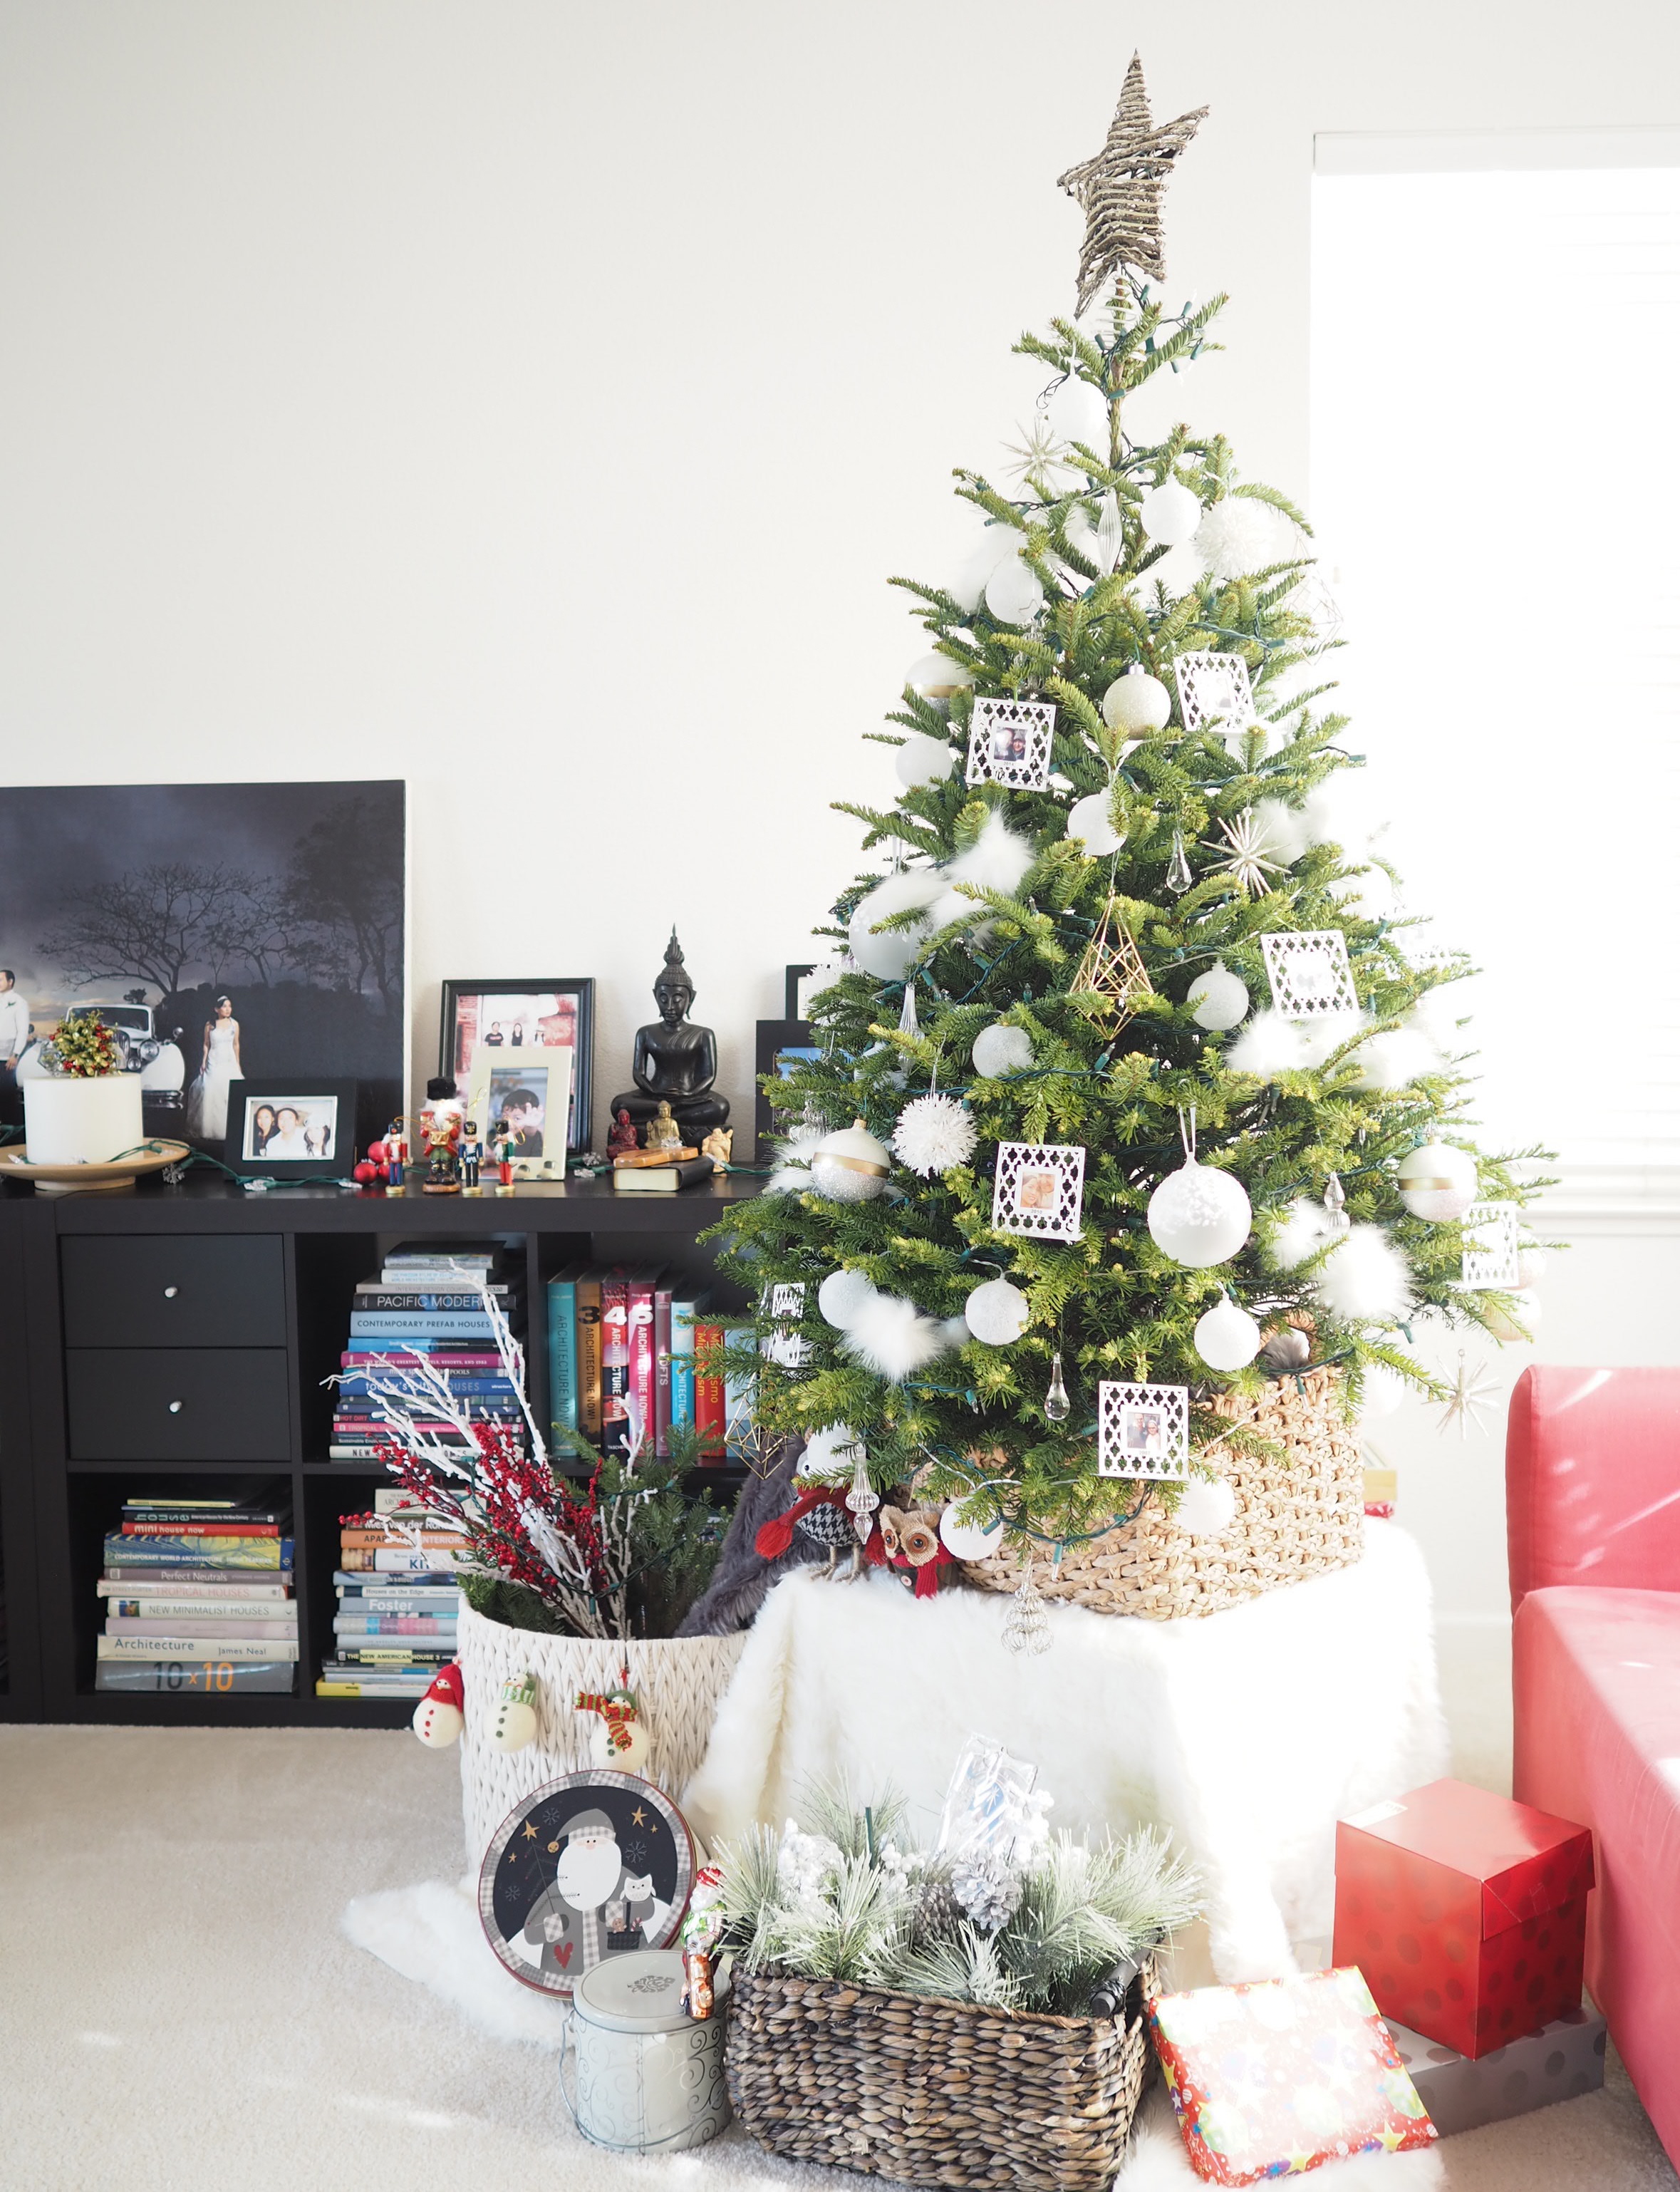 How to decorate a Scandinavian Christmas tree?